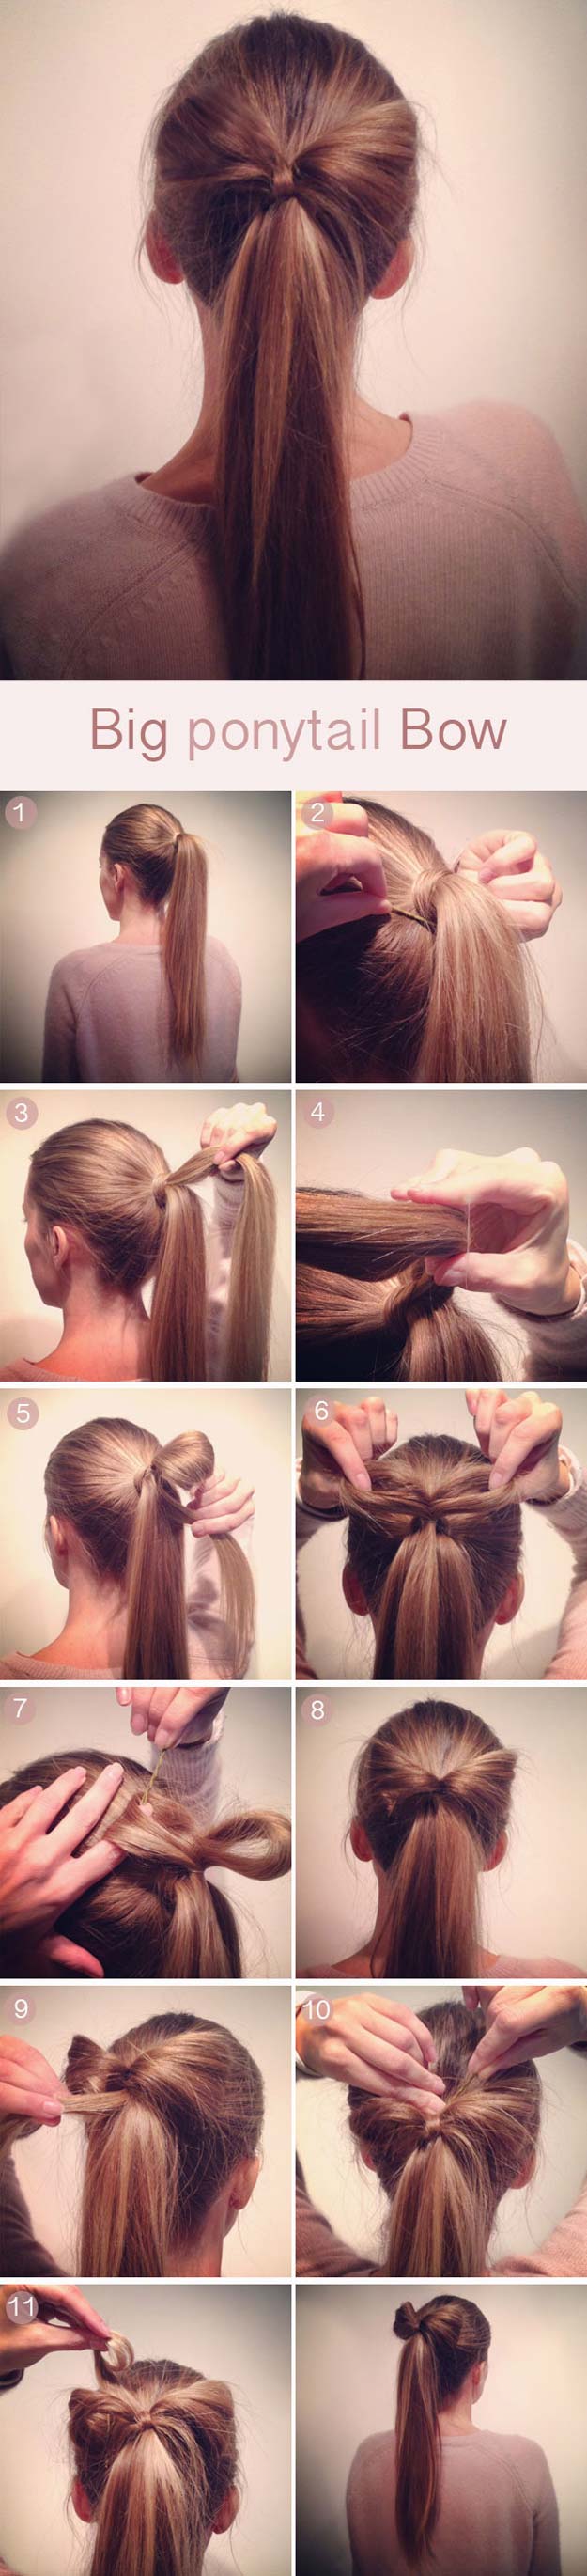 Best Hairstyles for Long Hair - Big Pony Tail Hair Bow - Step by Step Tutorials for Easy Curls, Updo, Half Up, Braids and Lazy Girl Looks. Prom Ideas, Special Occasion Hair and Braiding Instructions for Teens, Teenagers and Adults, Women and Girls 